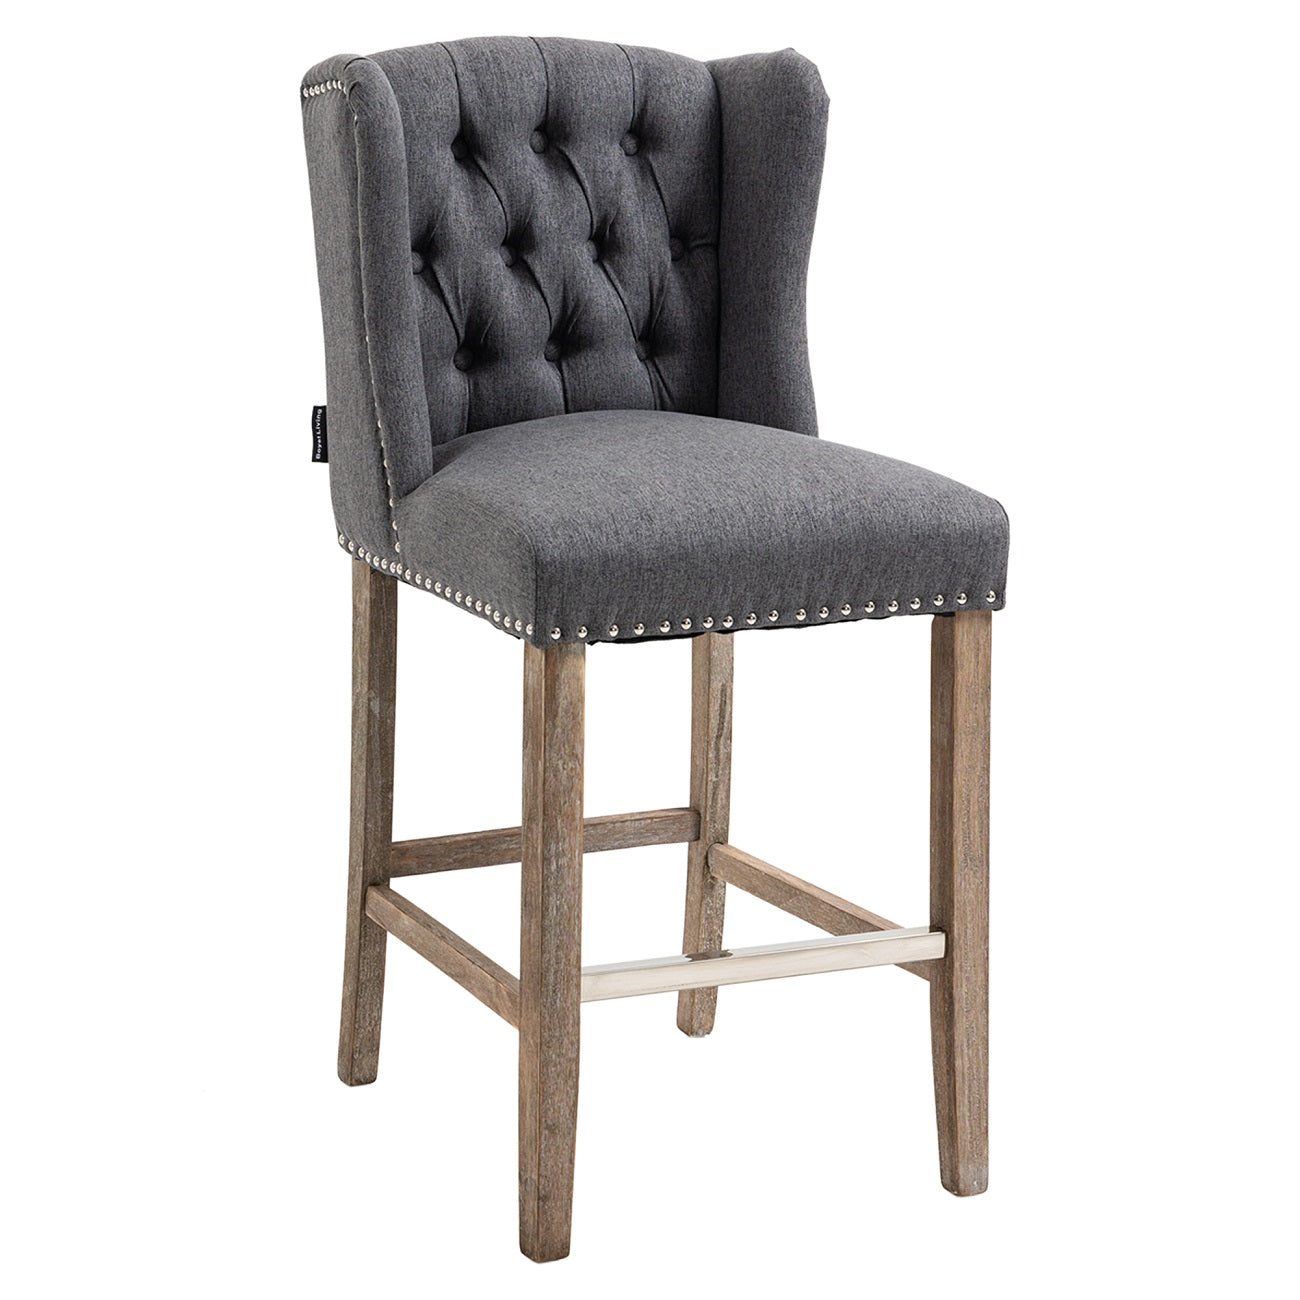 41 in. Classic Gray Linen Fabric Nailhead Tufted Bar Stool with Sturdy Solid Wood Legs, Set of 2-Boyel Living